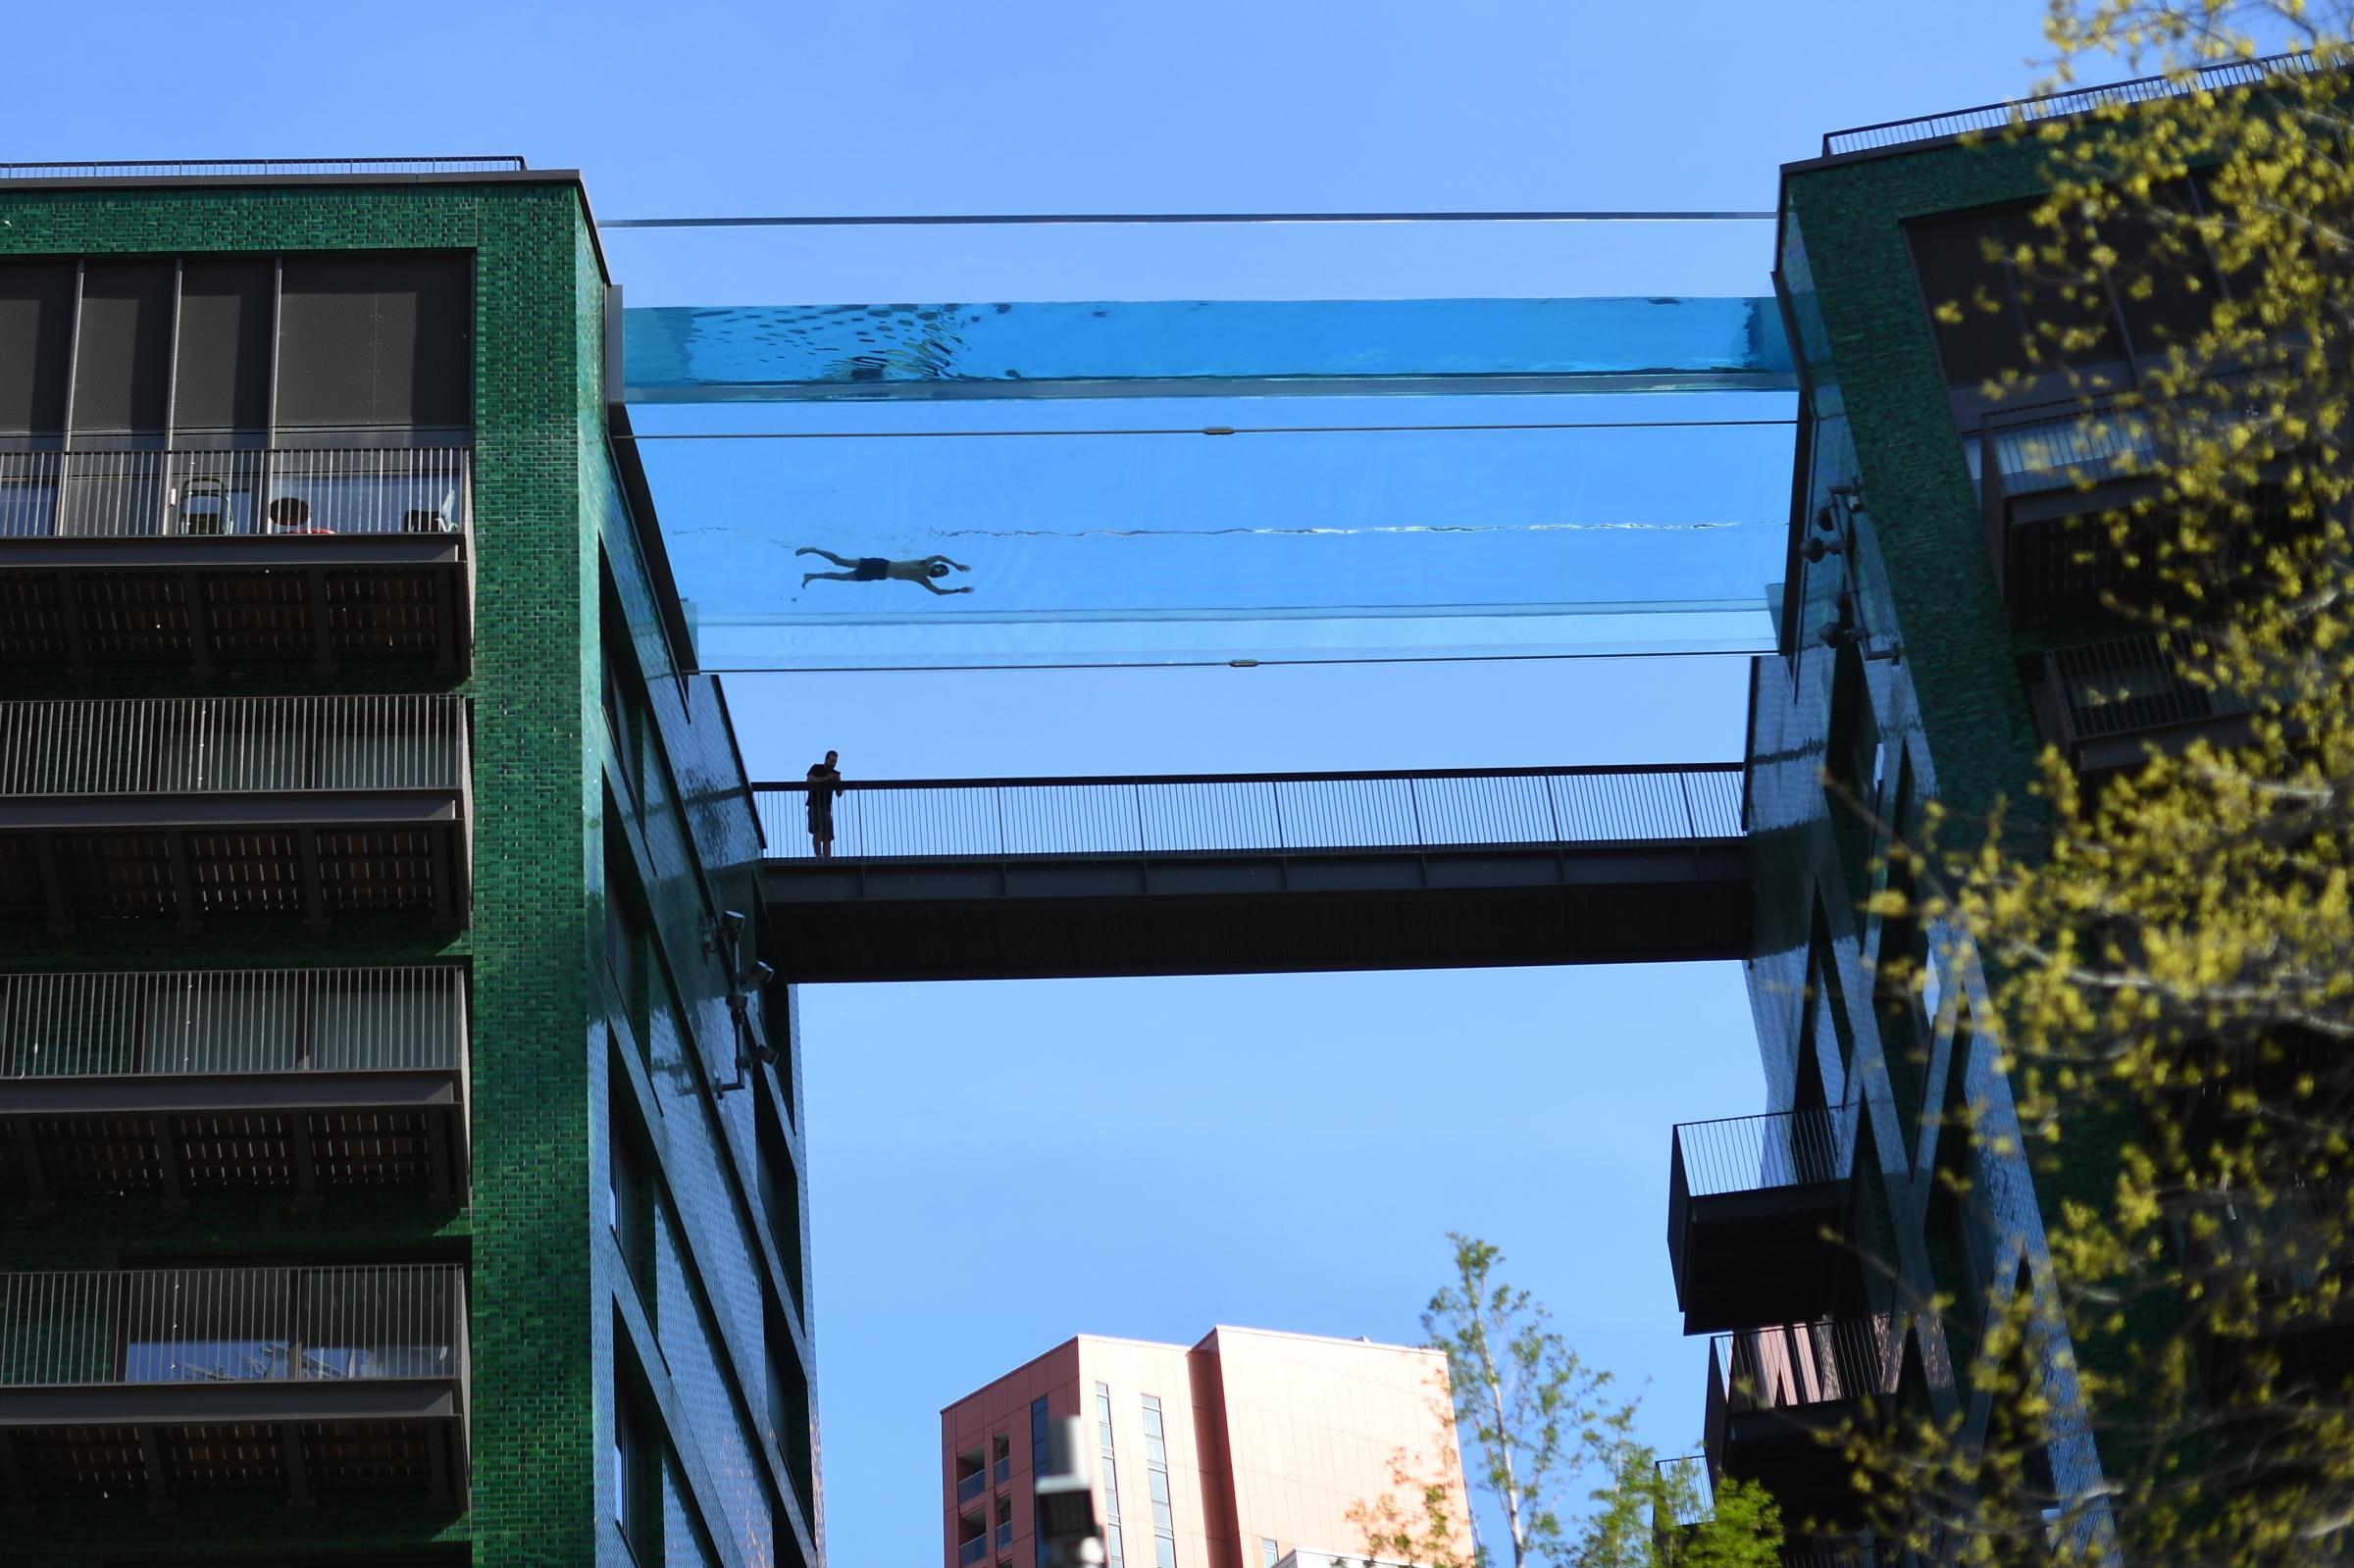 Sky Pool London S Floating Pool Suspended 115 Feet In The Air Sparks Debate The National